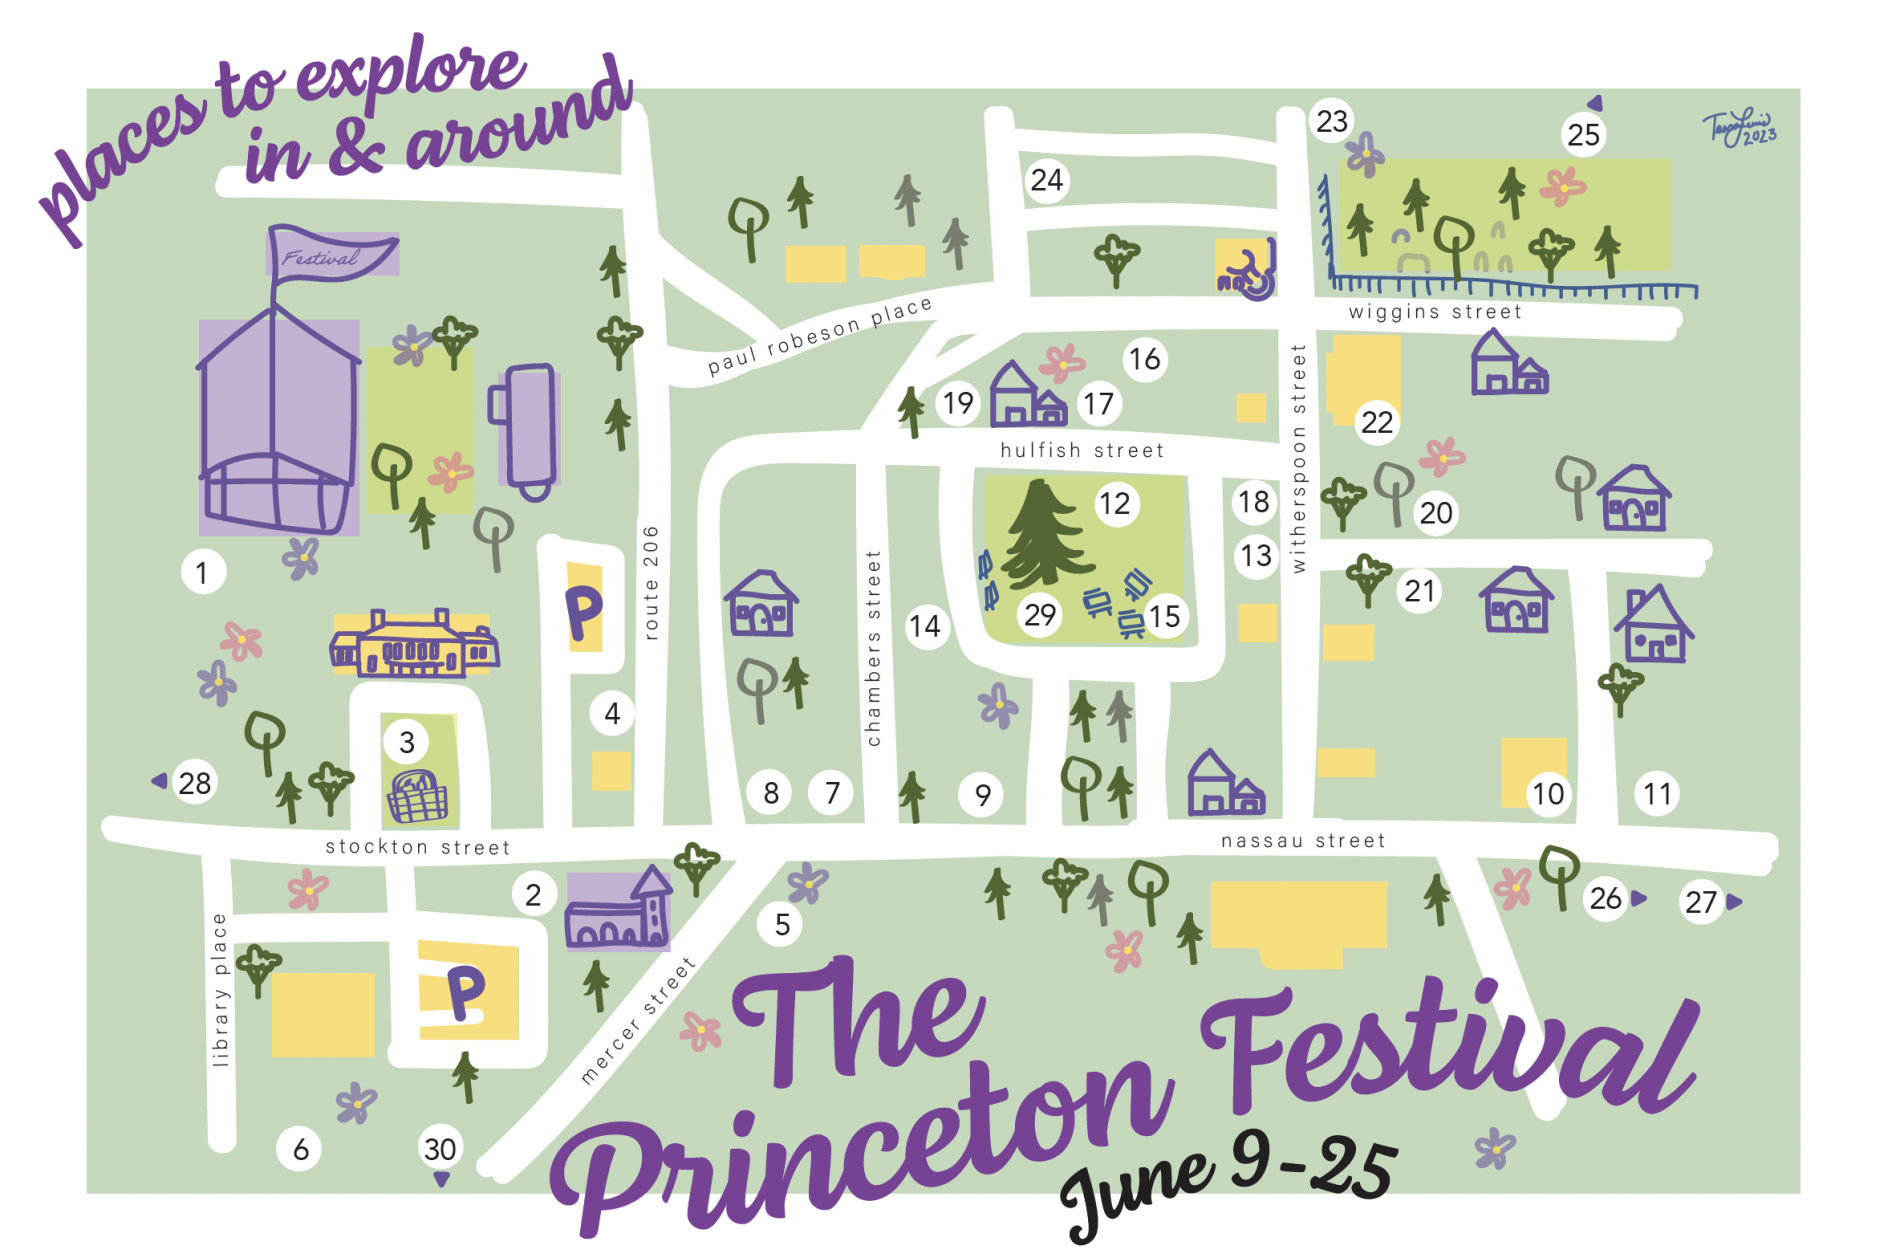 Artistic rendering of a map of the Princeton Festival and downtown Princeton